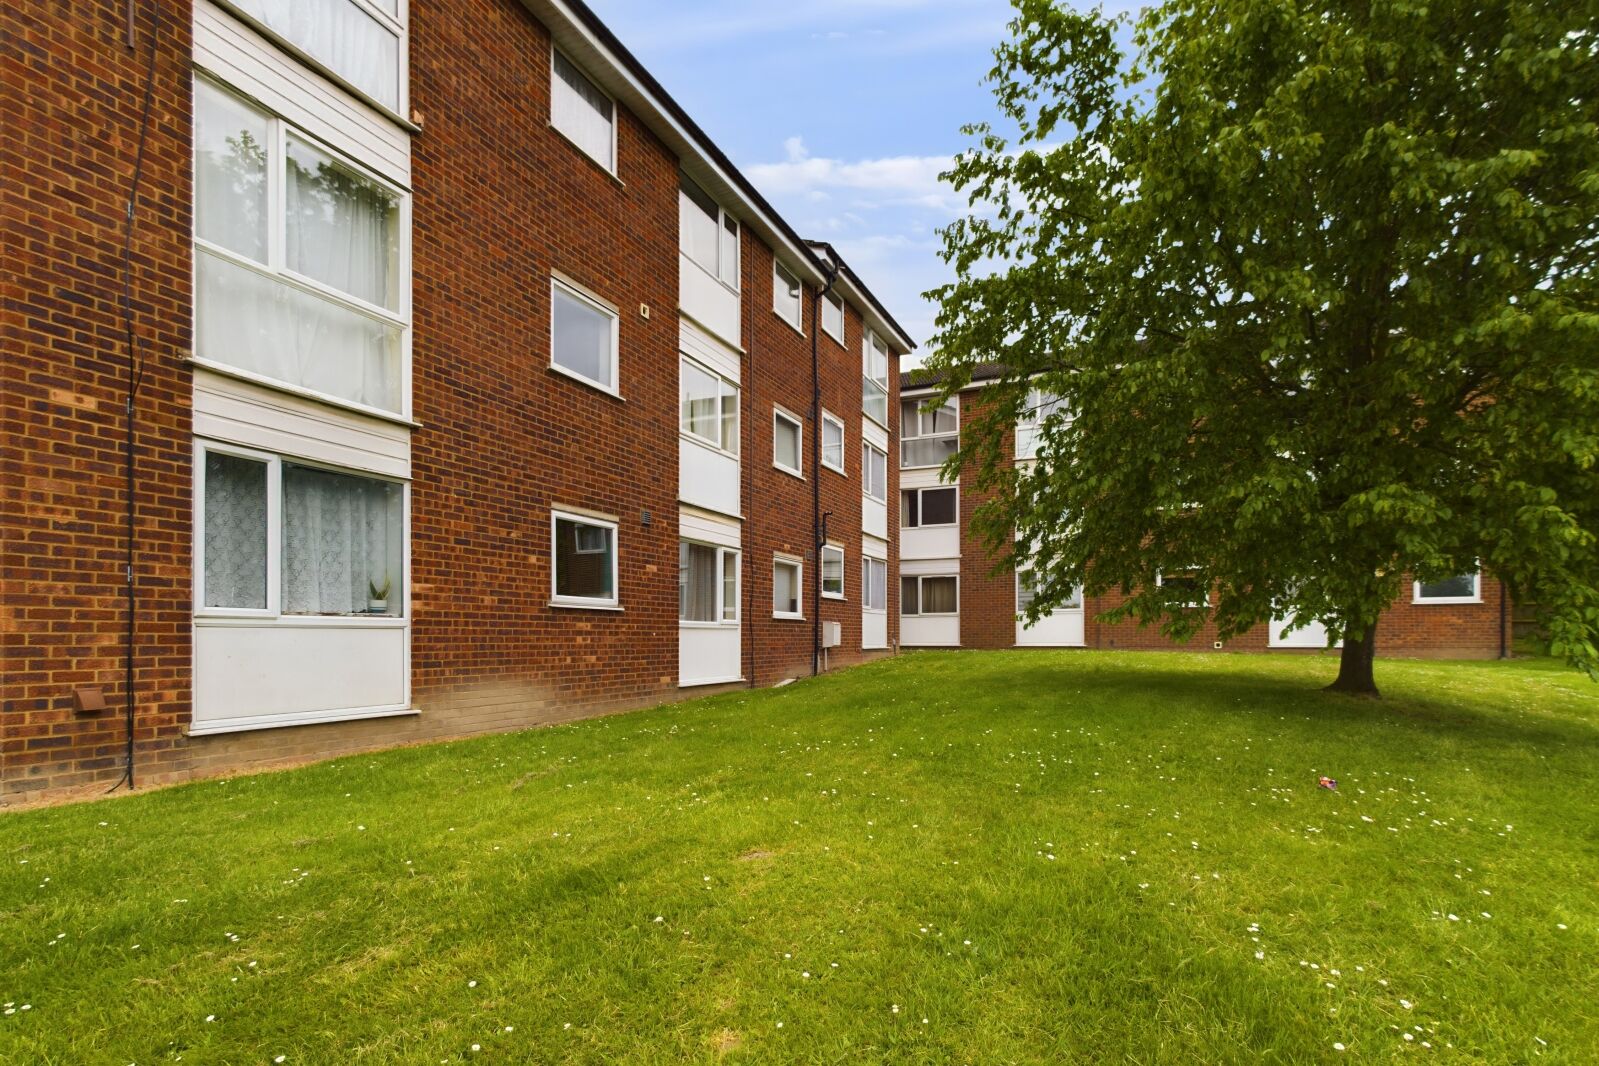 1 bedroom  flat for sale Burns Road, Royston, SG8, main image